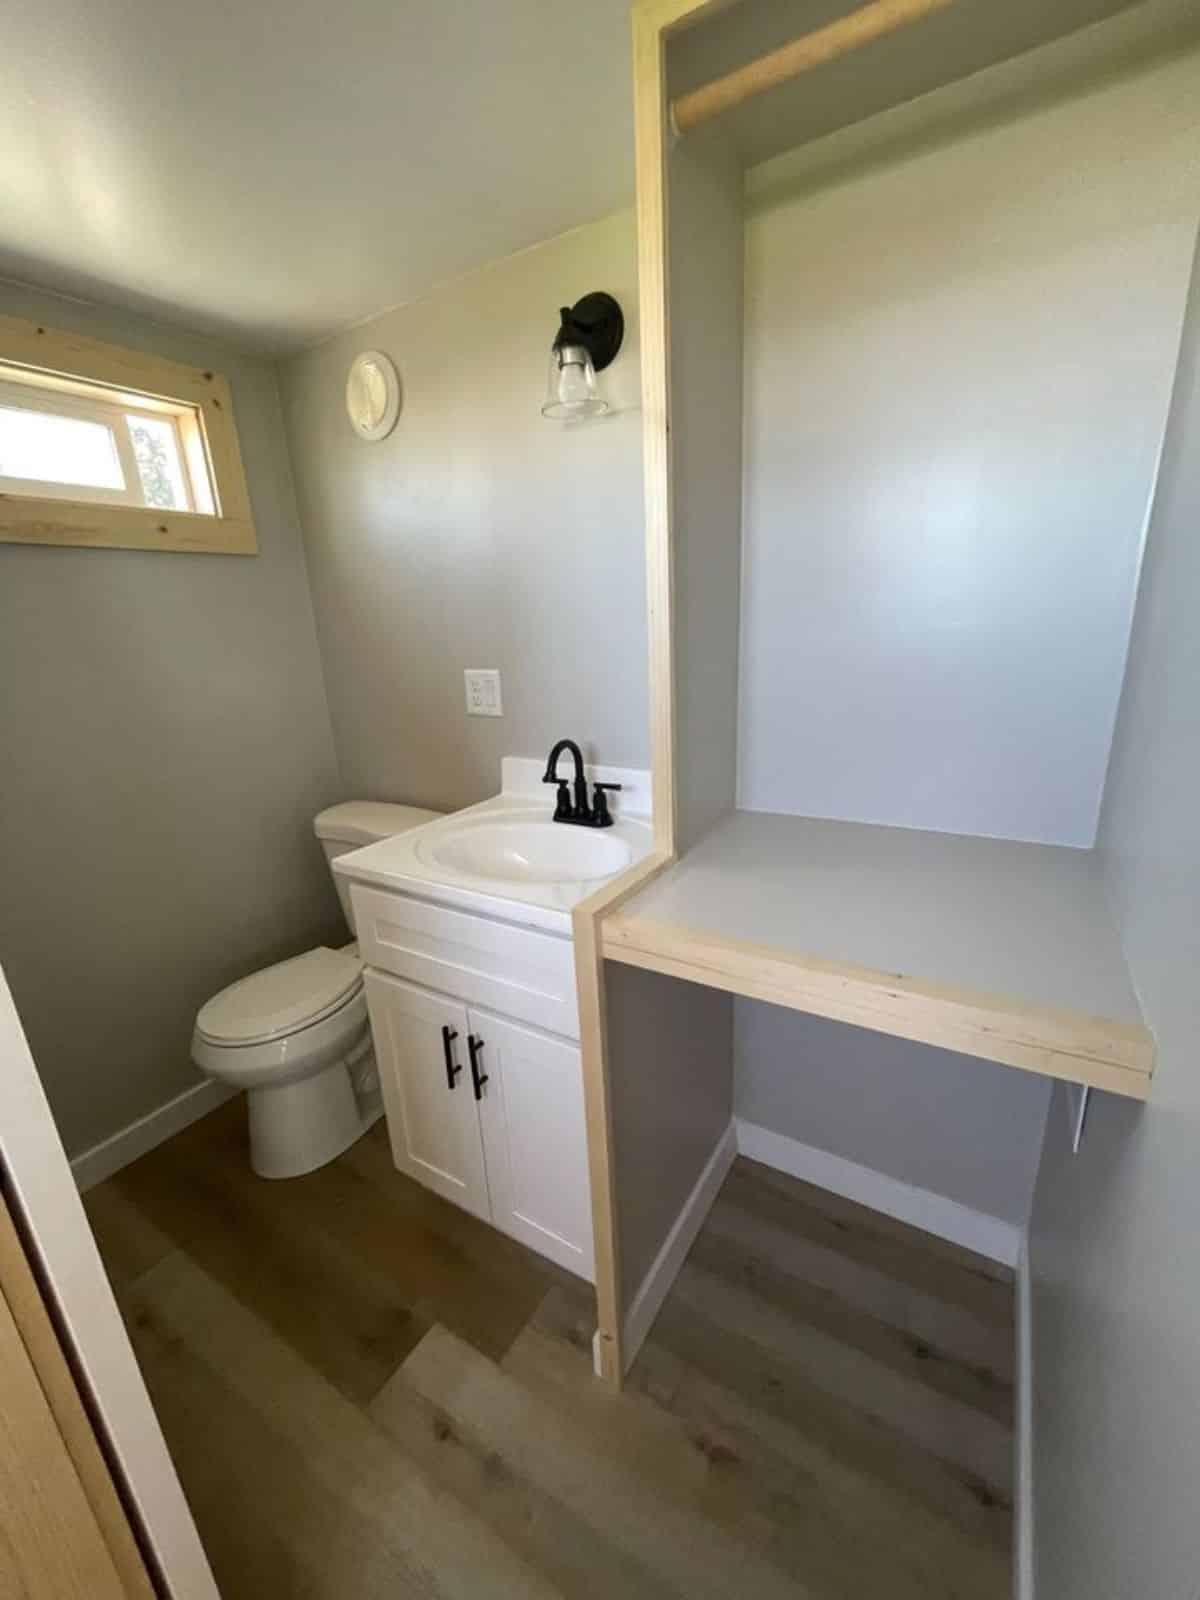 bathroom of tiny home for two has all the standard fittings